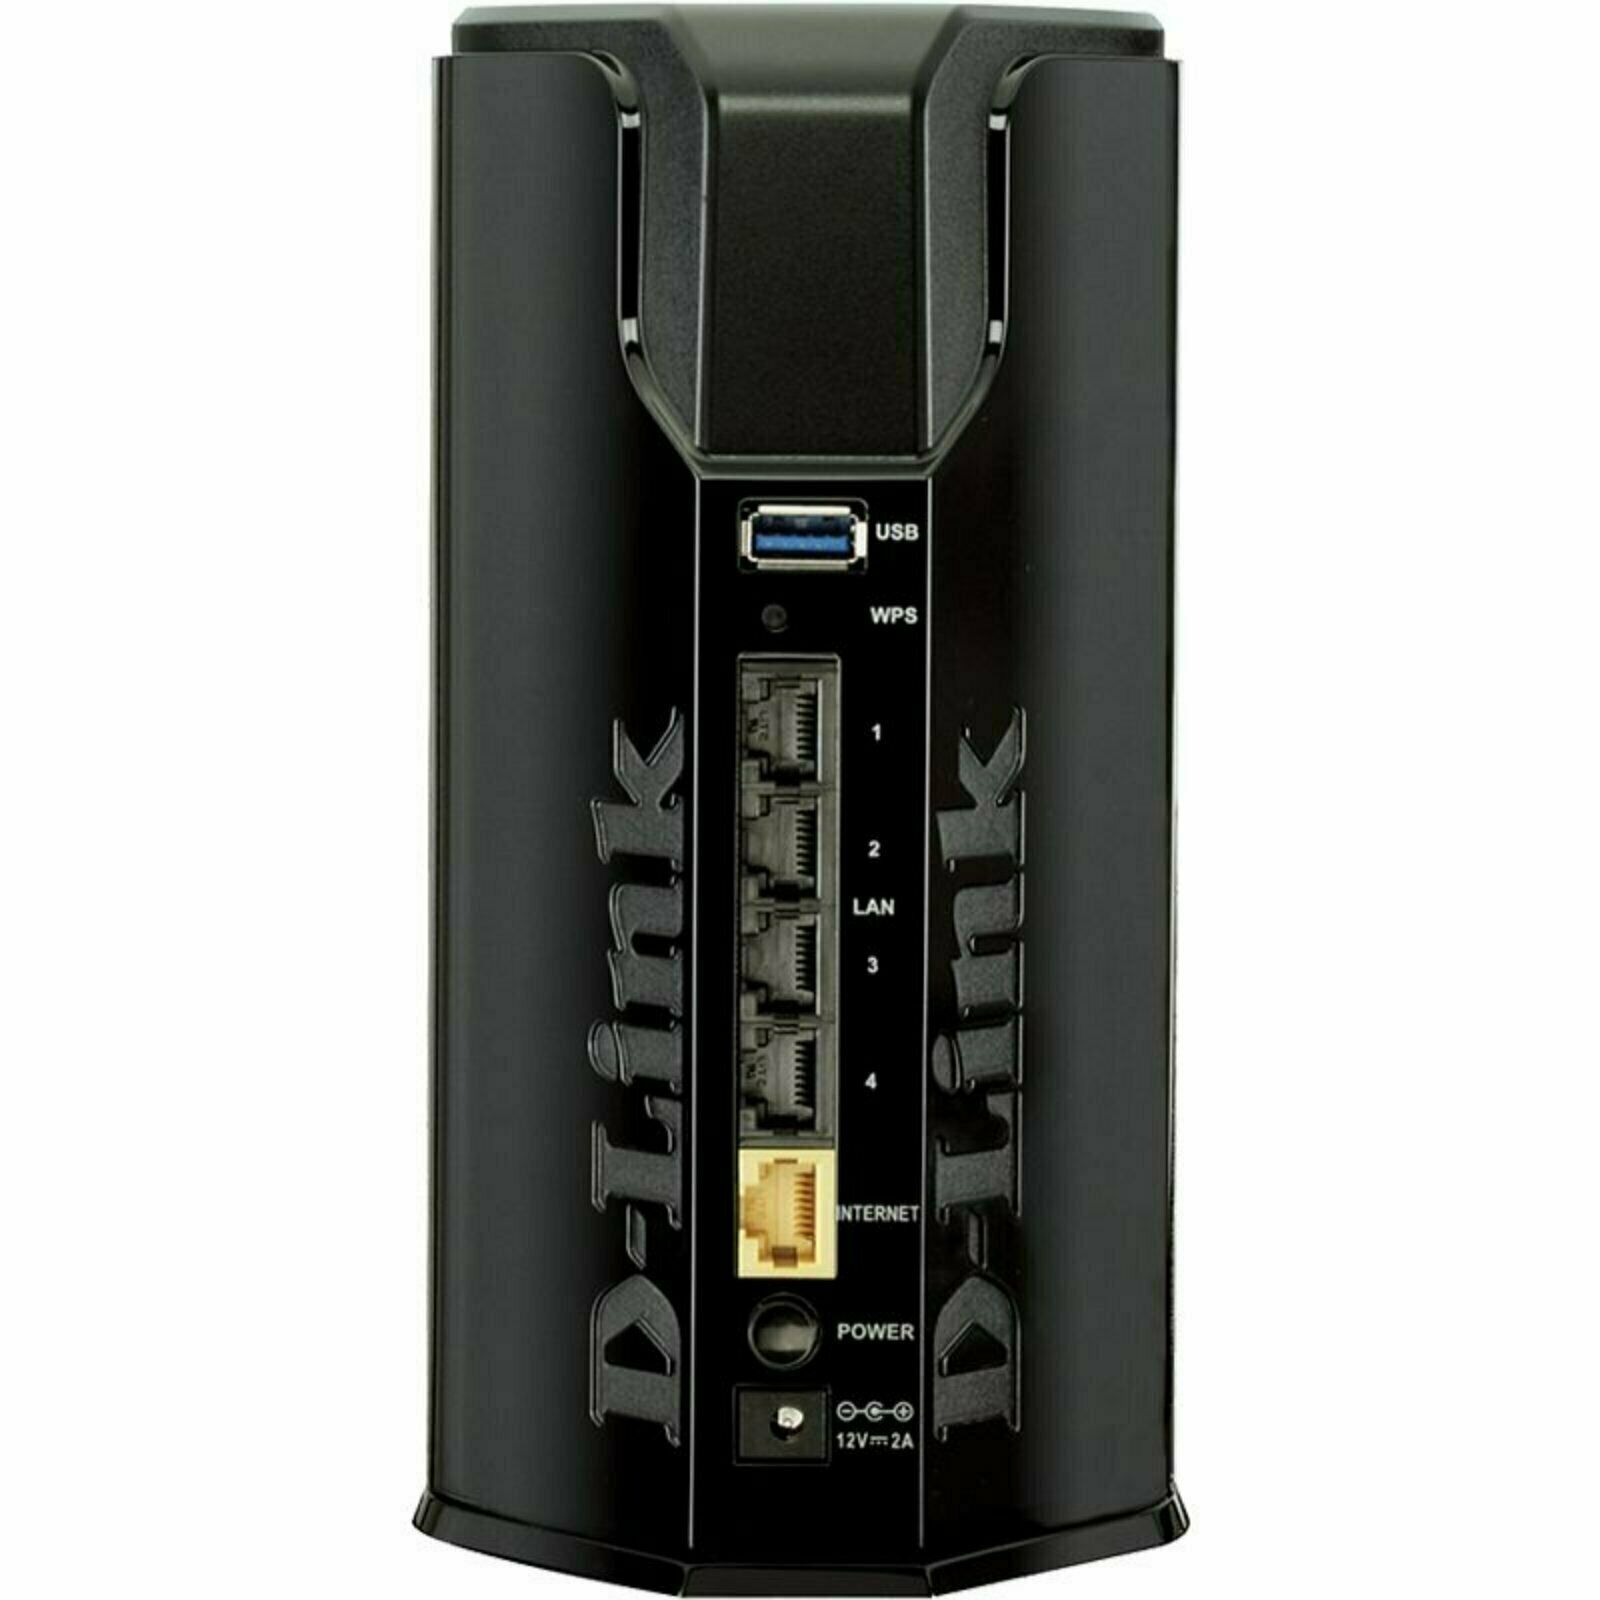 Preview: Refurbished D-Link DIR-860L AC1200 Wireless USB3.0 Cloud Router